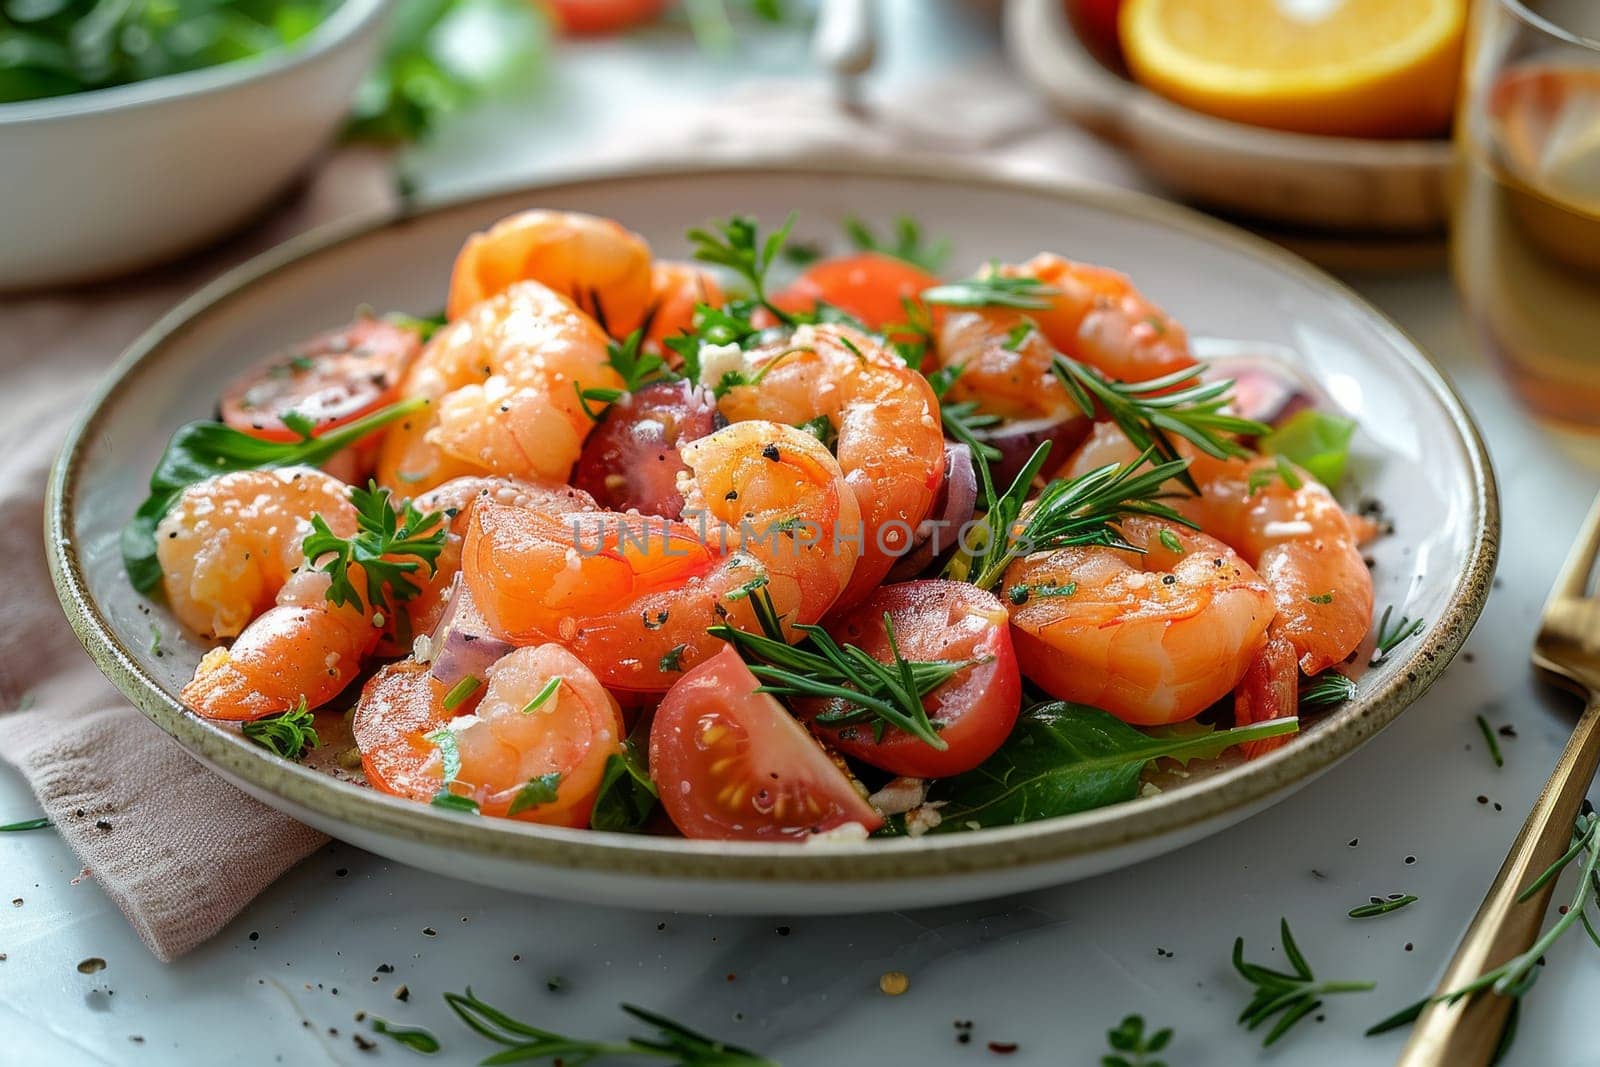 A plate of shrimp and tomatoes with parsley and lemon wedges. The plate is set on a table with a wine glass and a fork